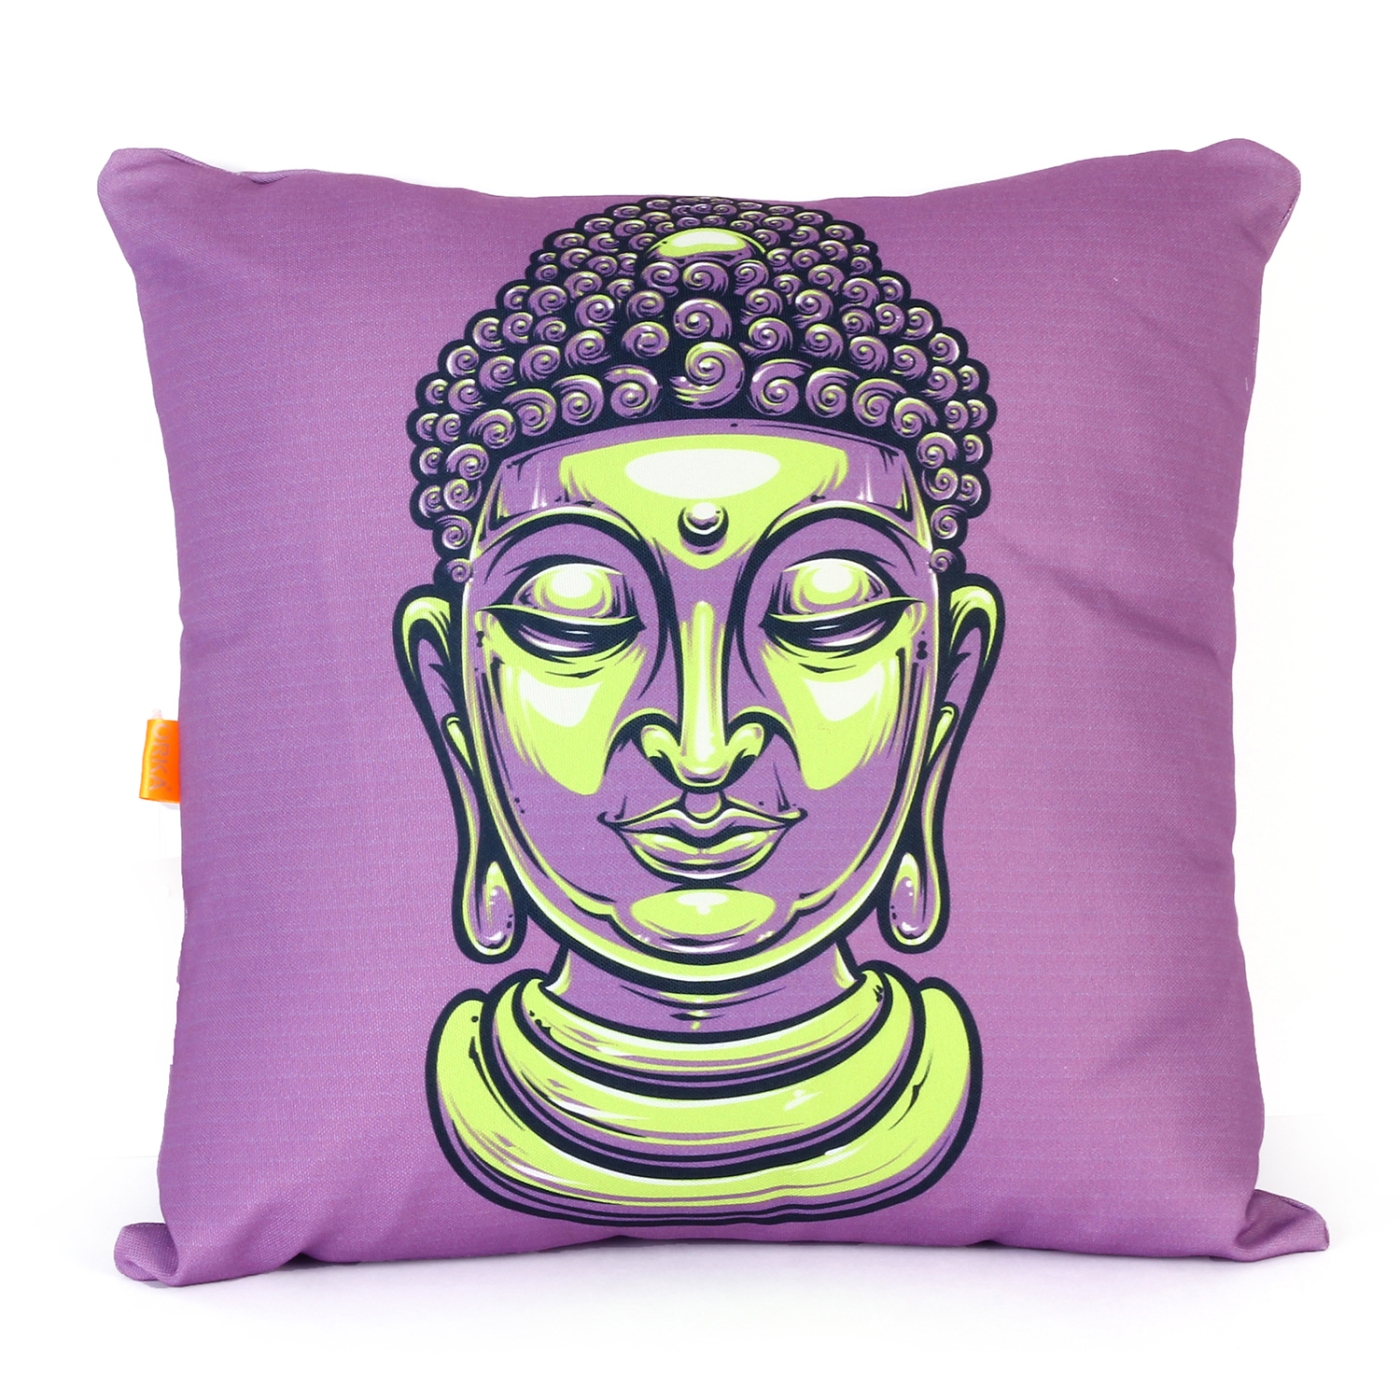 ORKA Digital Printed Canvas Filled With Polyfill Square Cushion 14 X 14 Inch (Violet)  